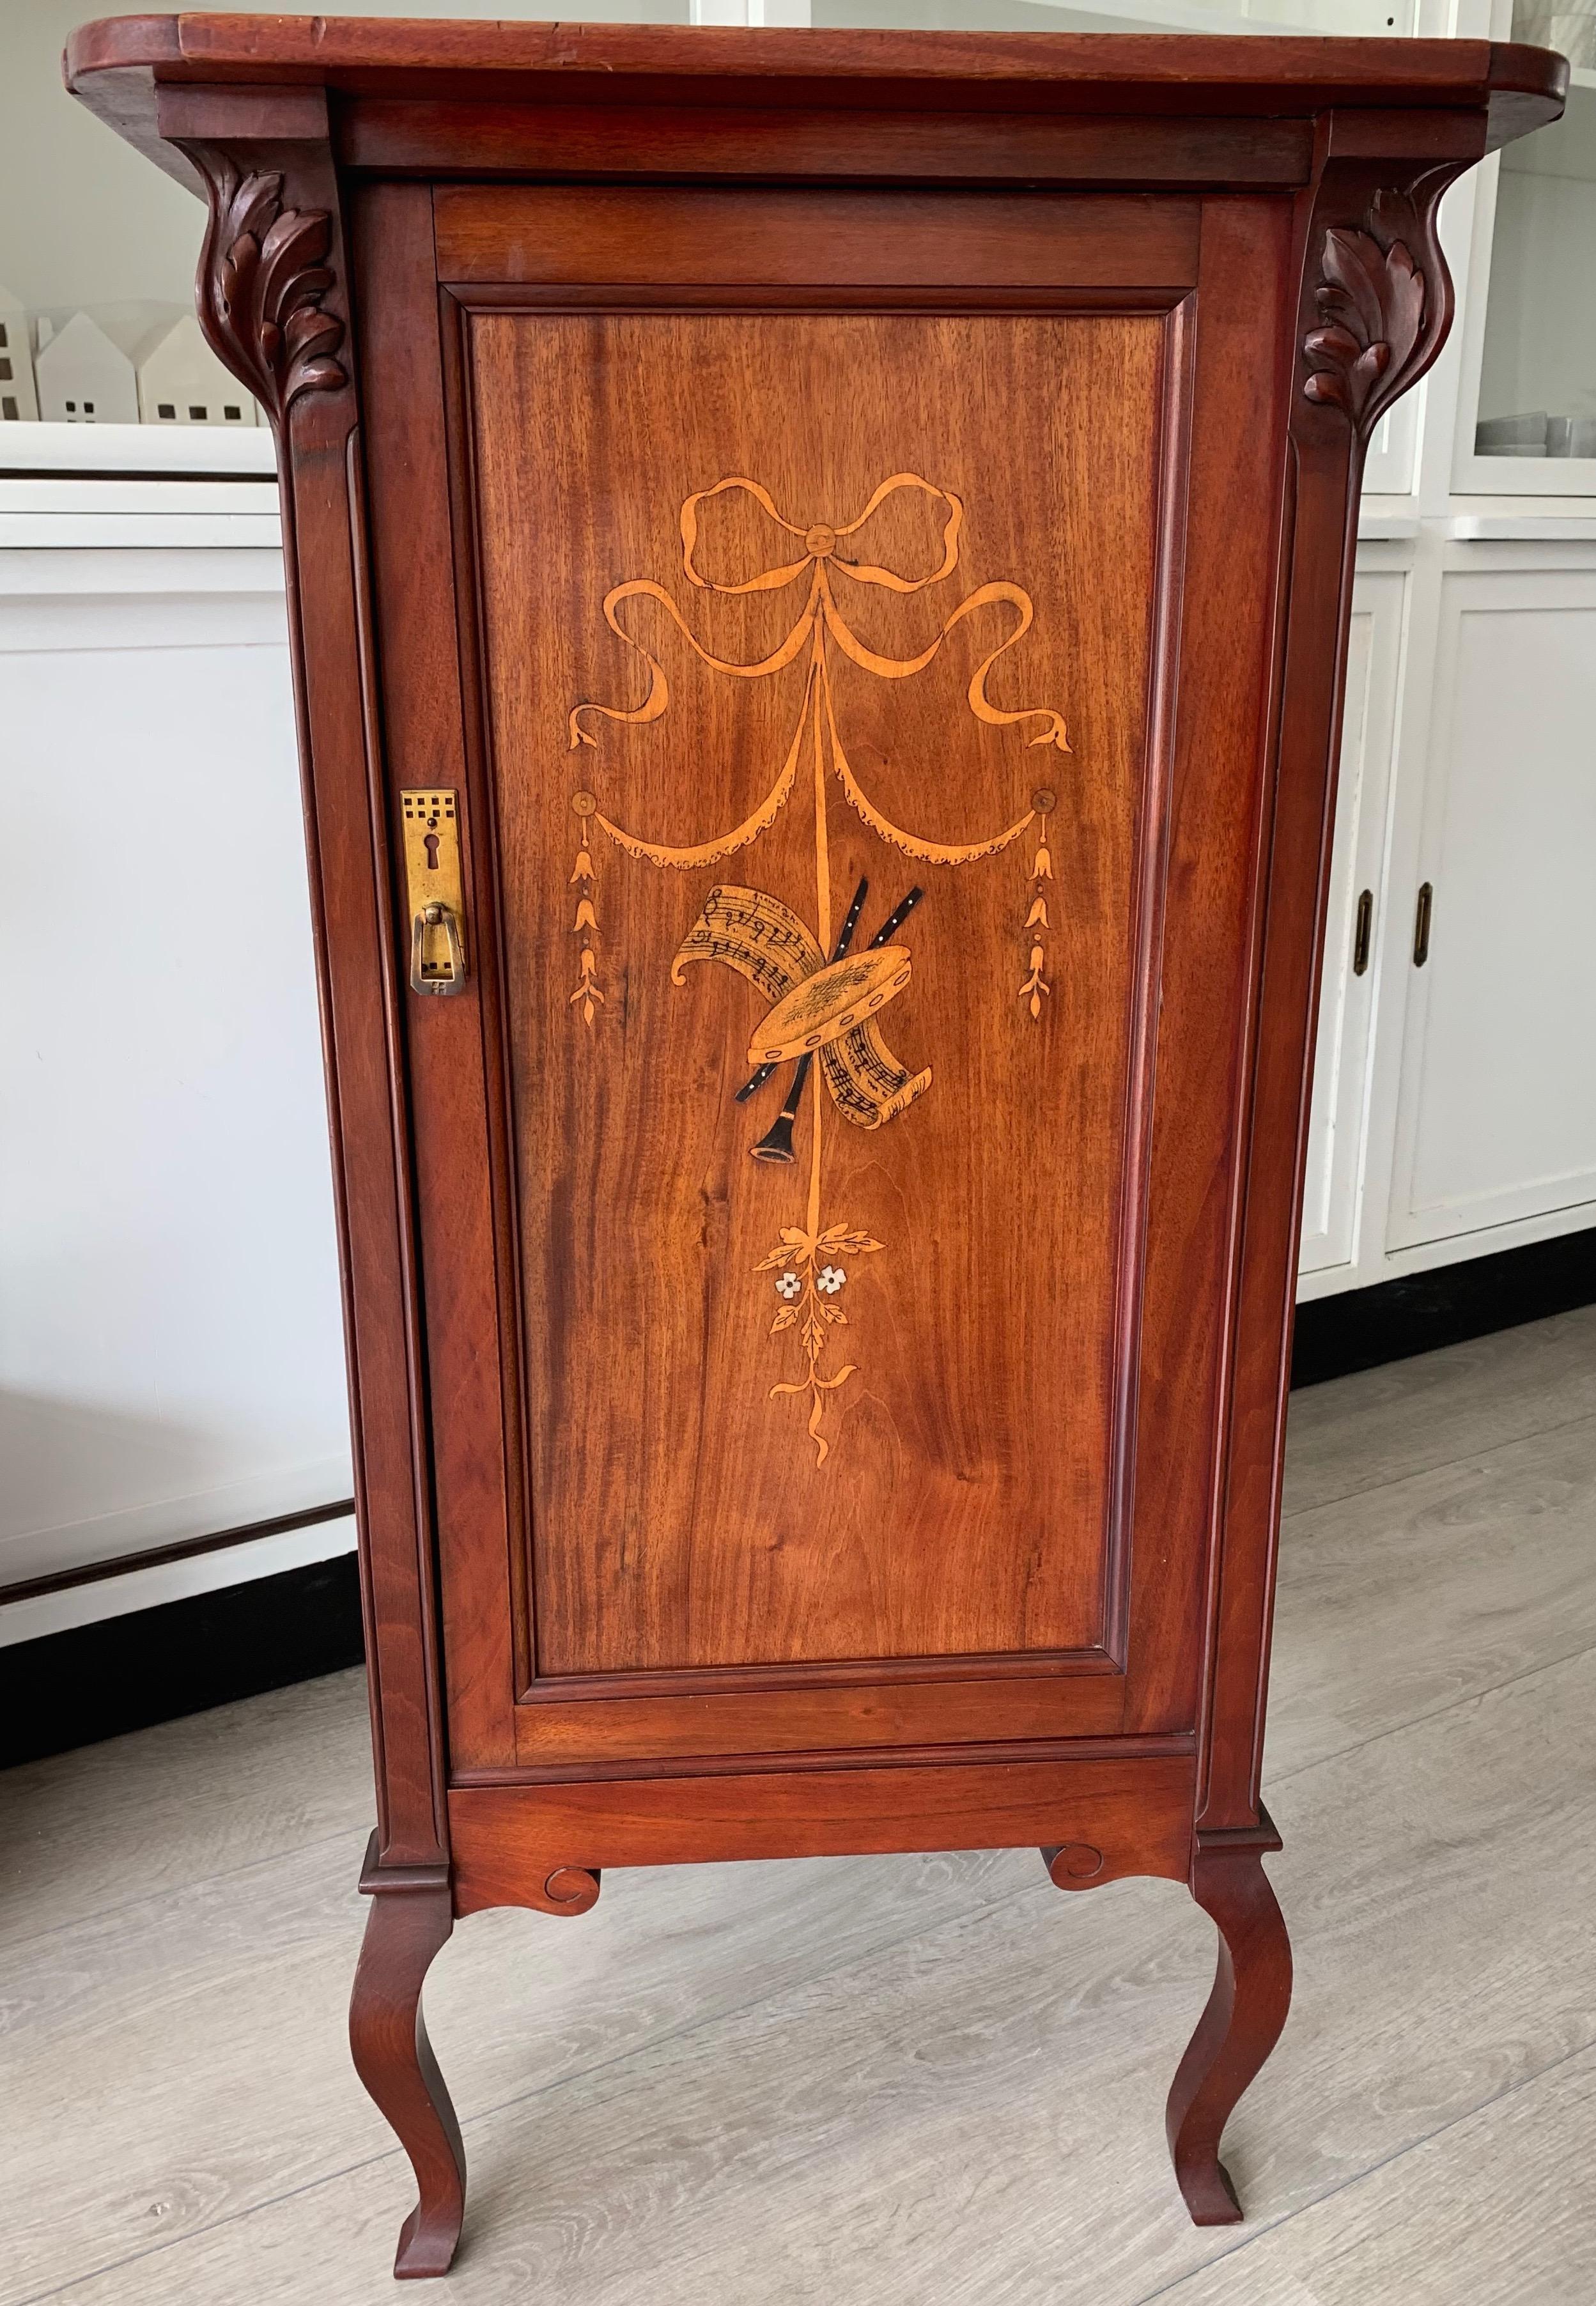 Wonderful design and condition music cabinet, circa 1930.

This early 20th century, French cabinet is another great example of the quality and beauty that was made in Europe in those days. The quality of the inlaid ribbon and also that of the